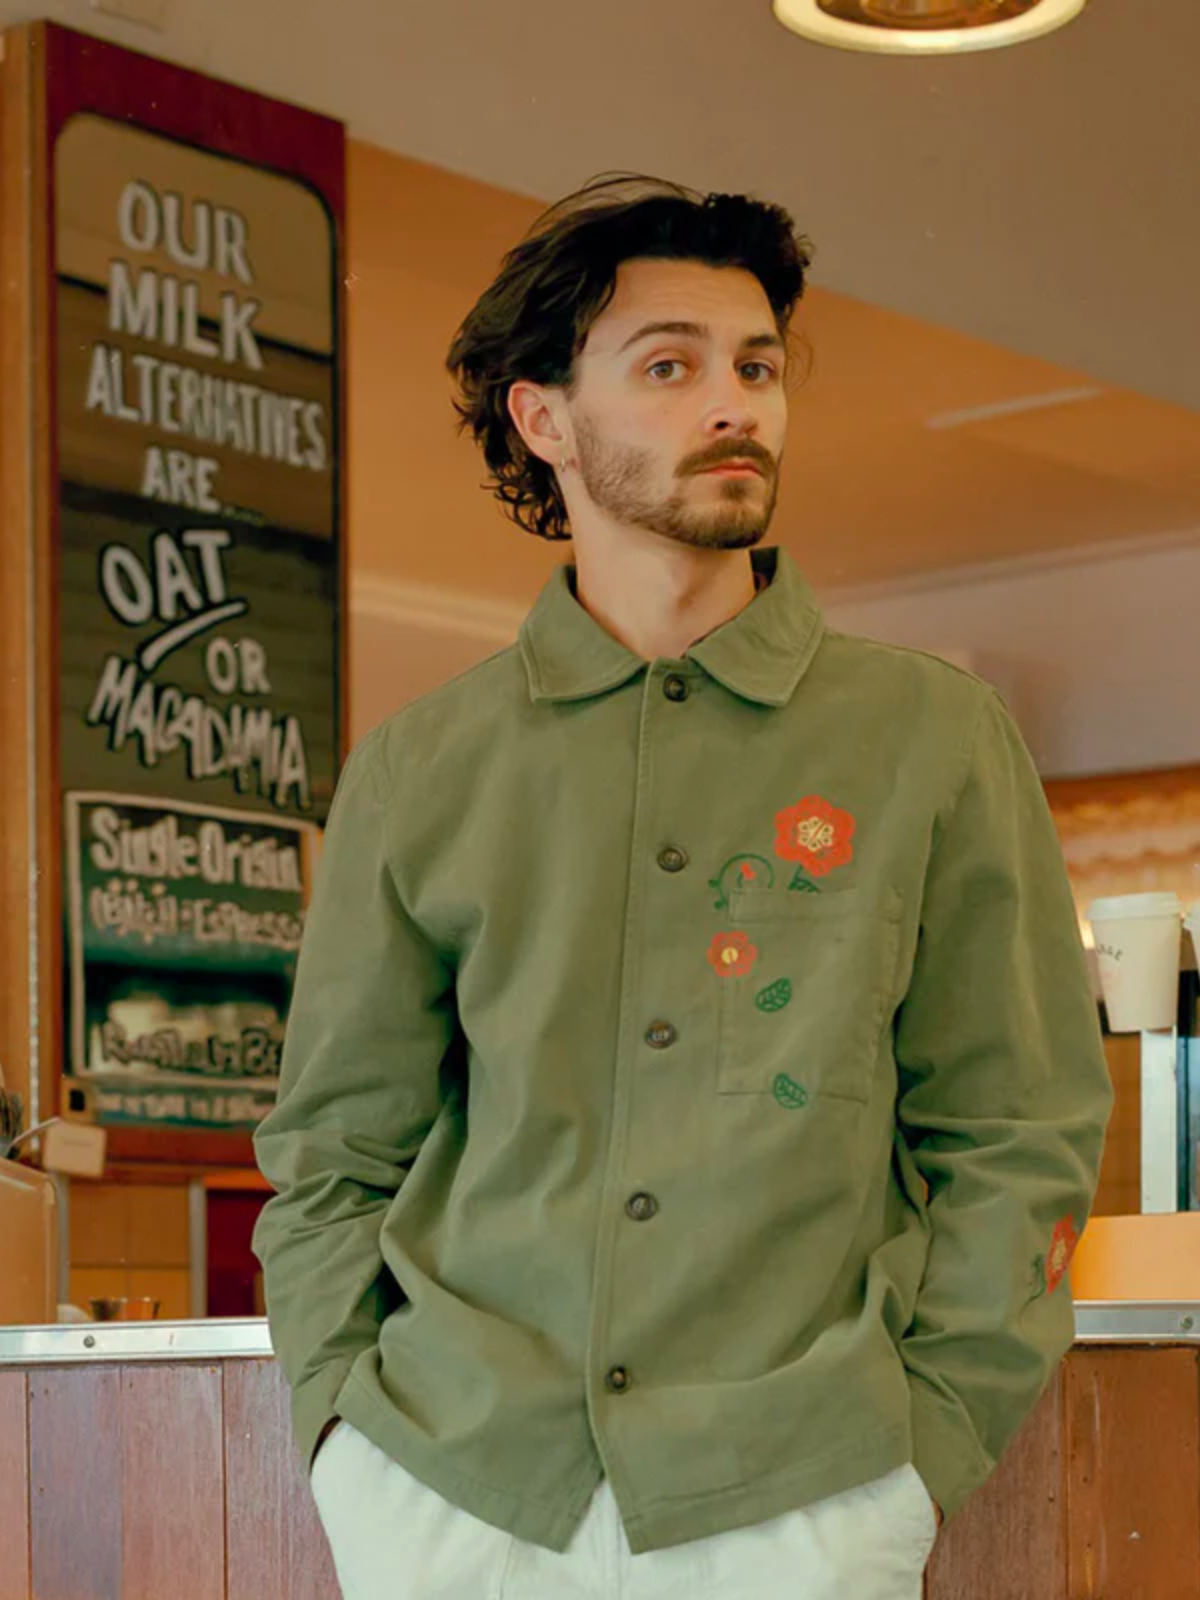 rhythm flower cpo overshirt olive floral embroidery stitching 100% cotton kempt athens ga georgia men's clothing store